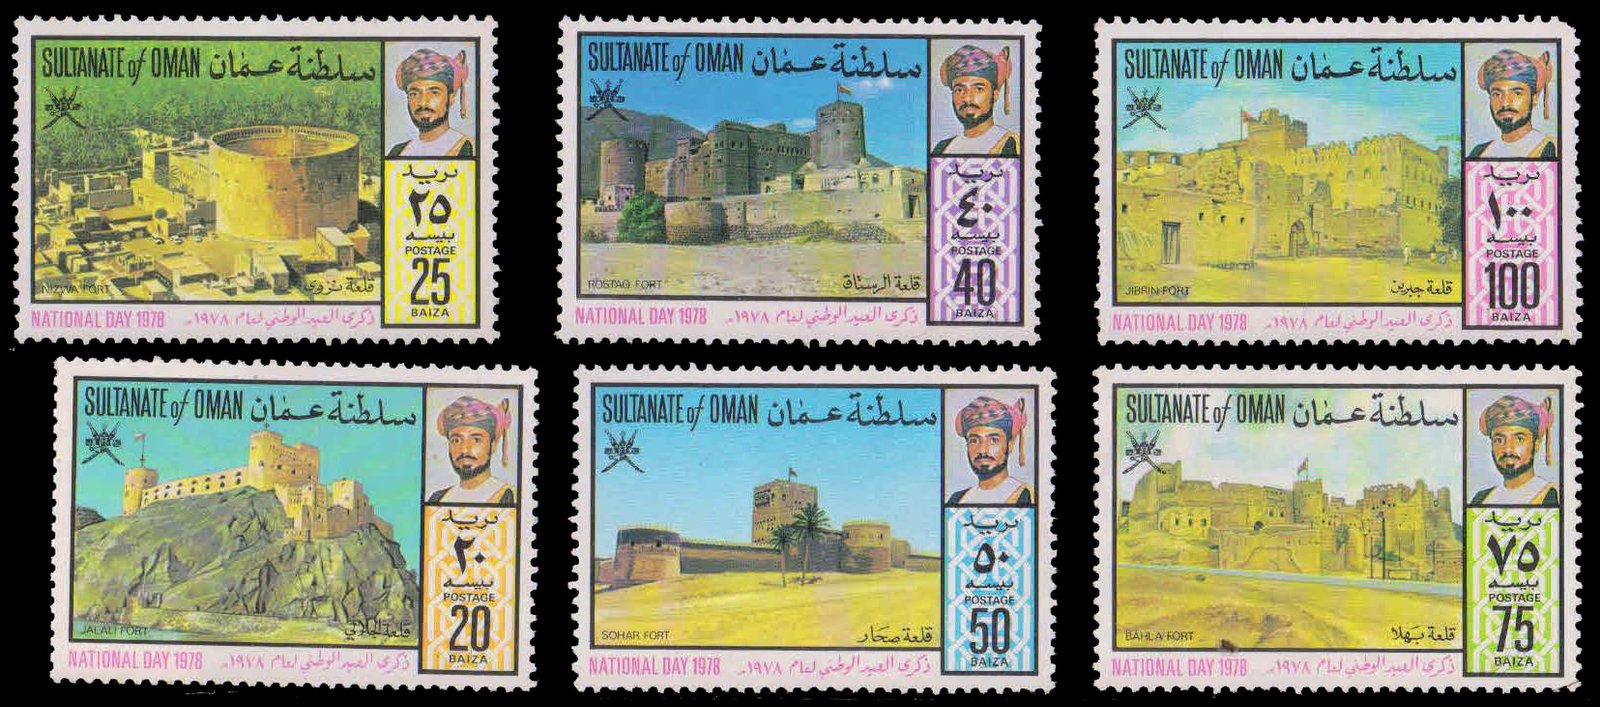 OMAN 1978-Forts, National Day, Set of 6, MNH, S.G. 216-21-Cat £ 25-